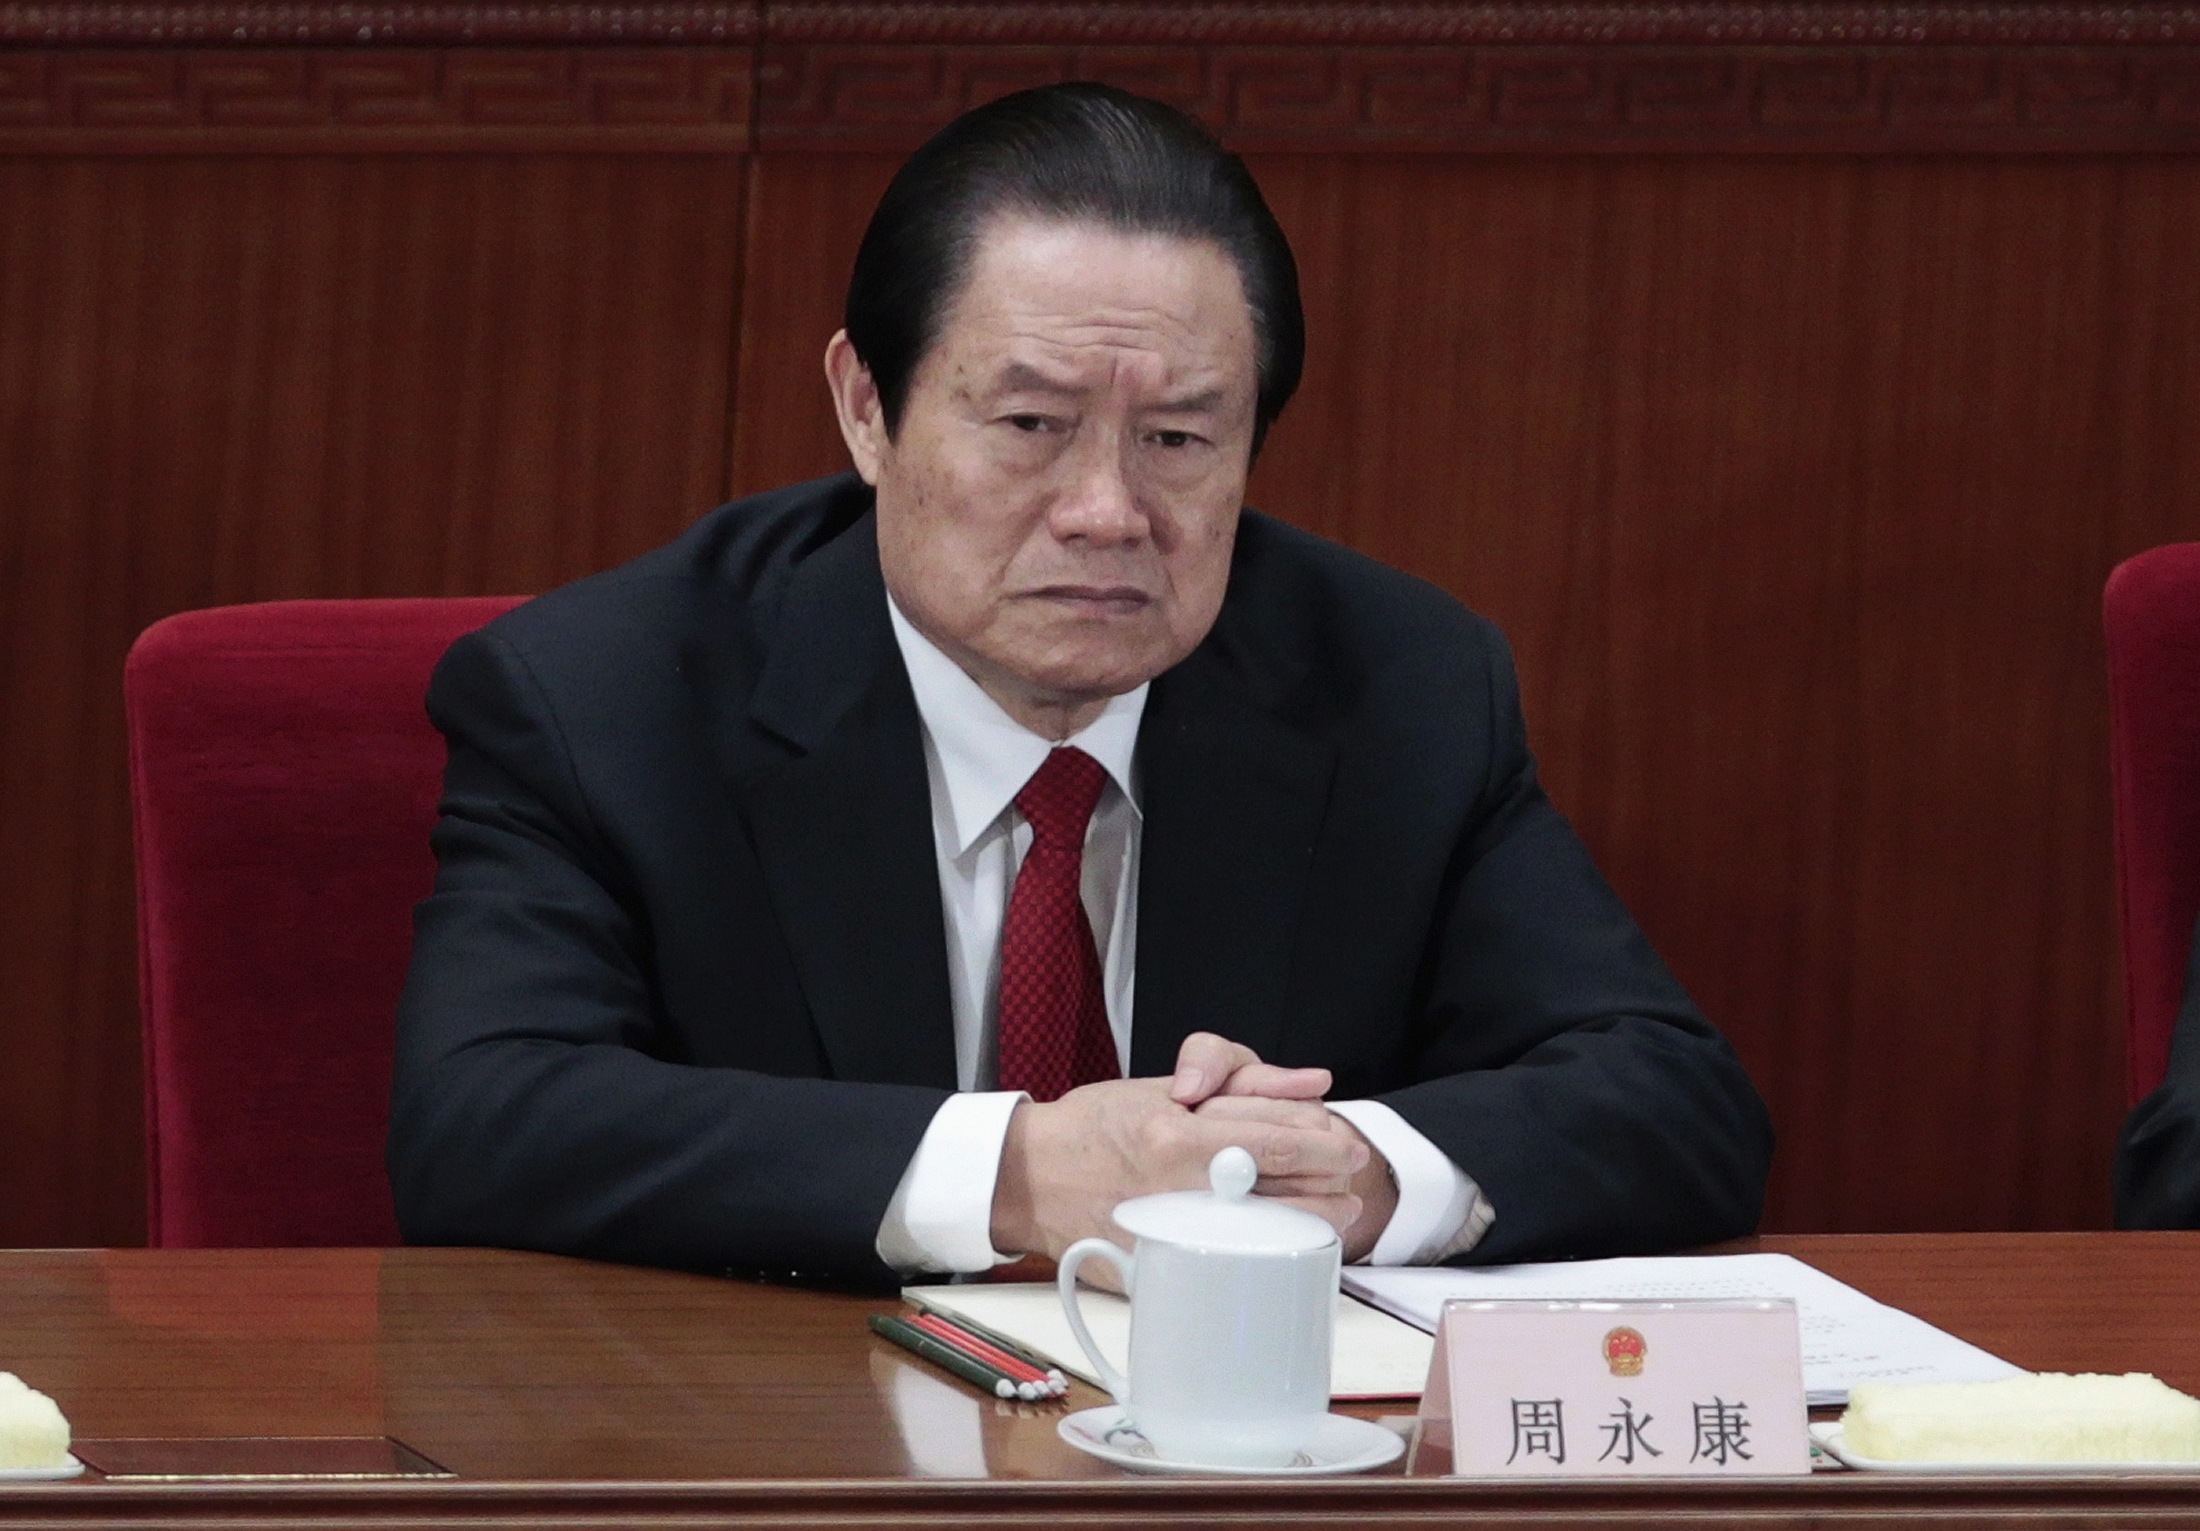 China Likely to Expel Disgraced Security Chief from Party: Sources